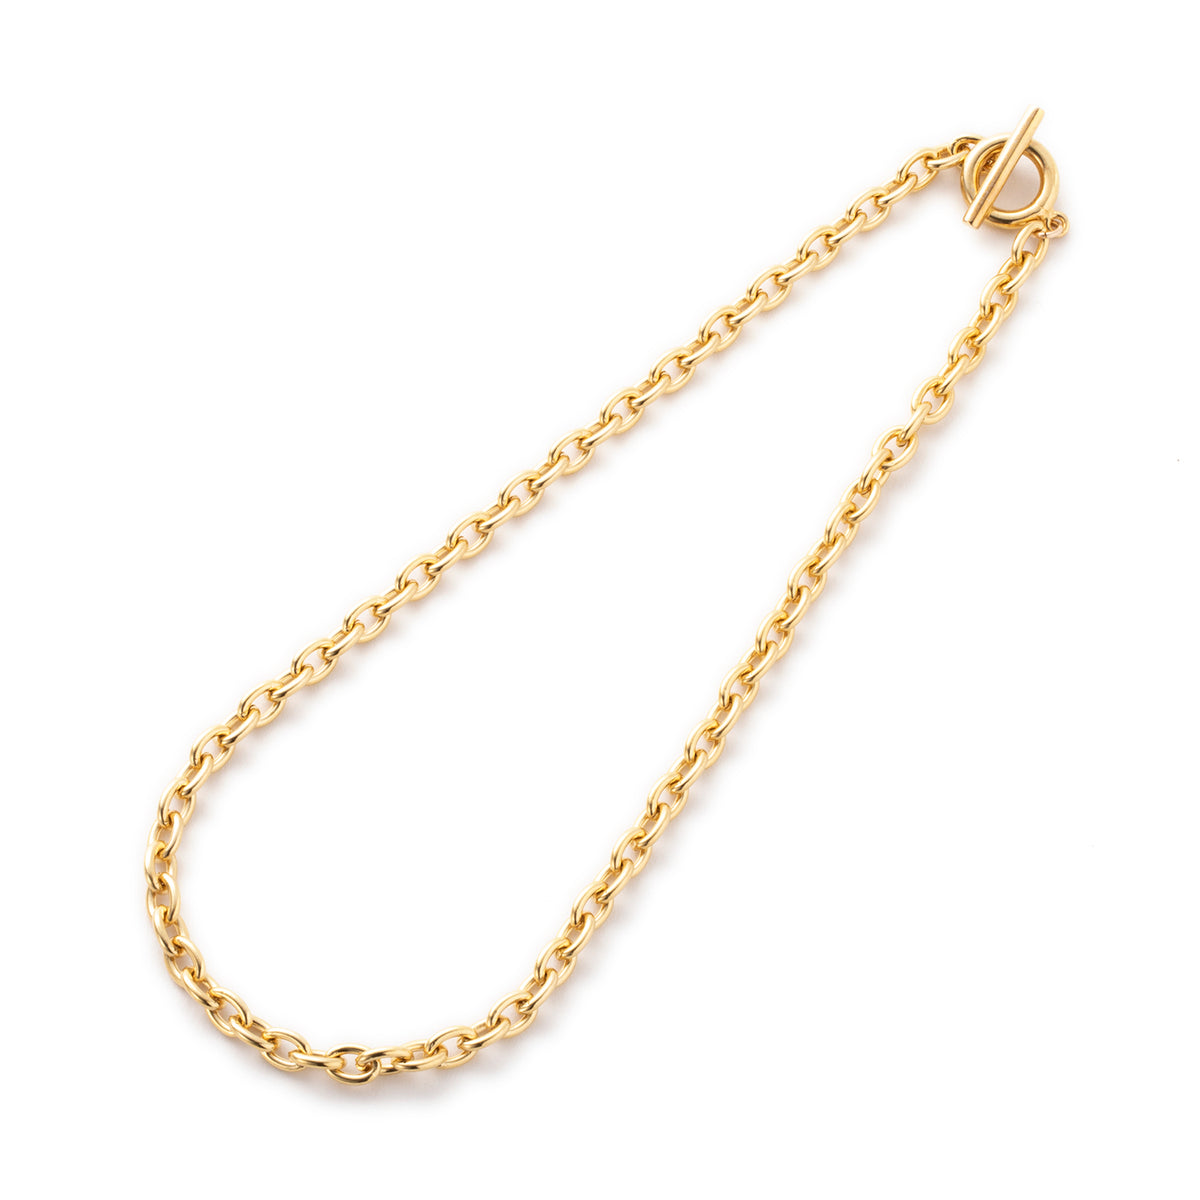 Taaii | ターイ AZUKI CHAIN NECKLACE アズキチェーンネックレス